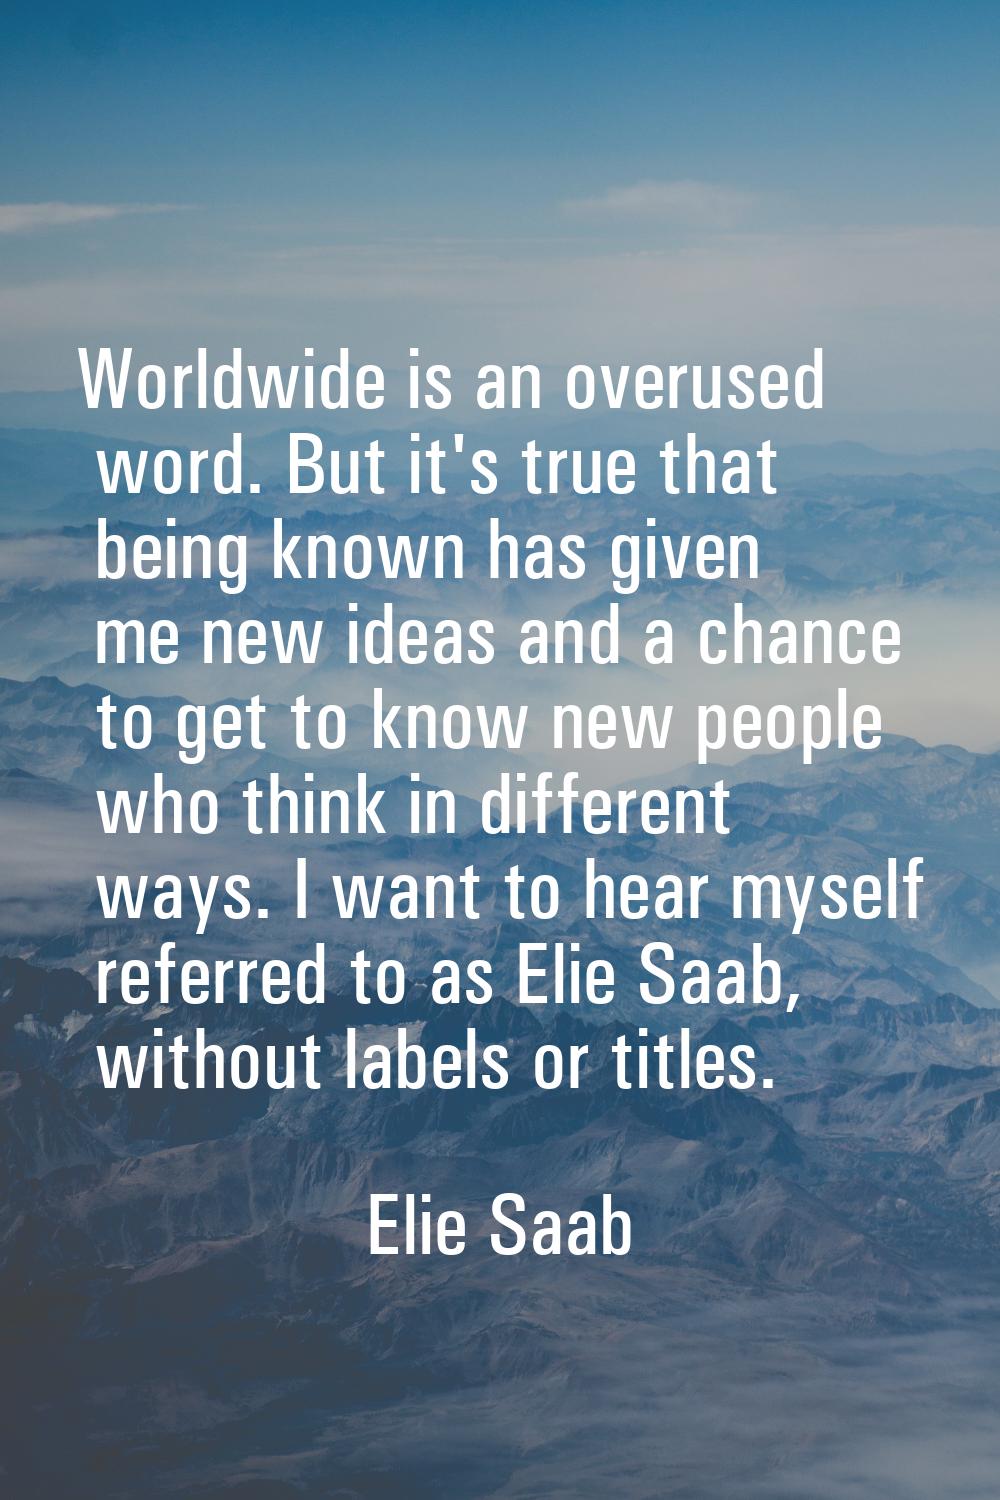 Worldwide is an overused word. But it's true that being known has given me new ideas and a chance t